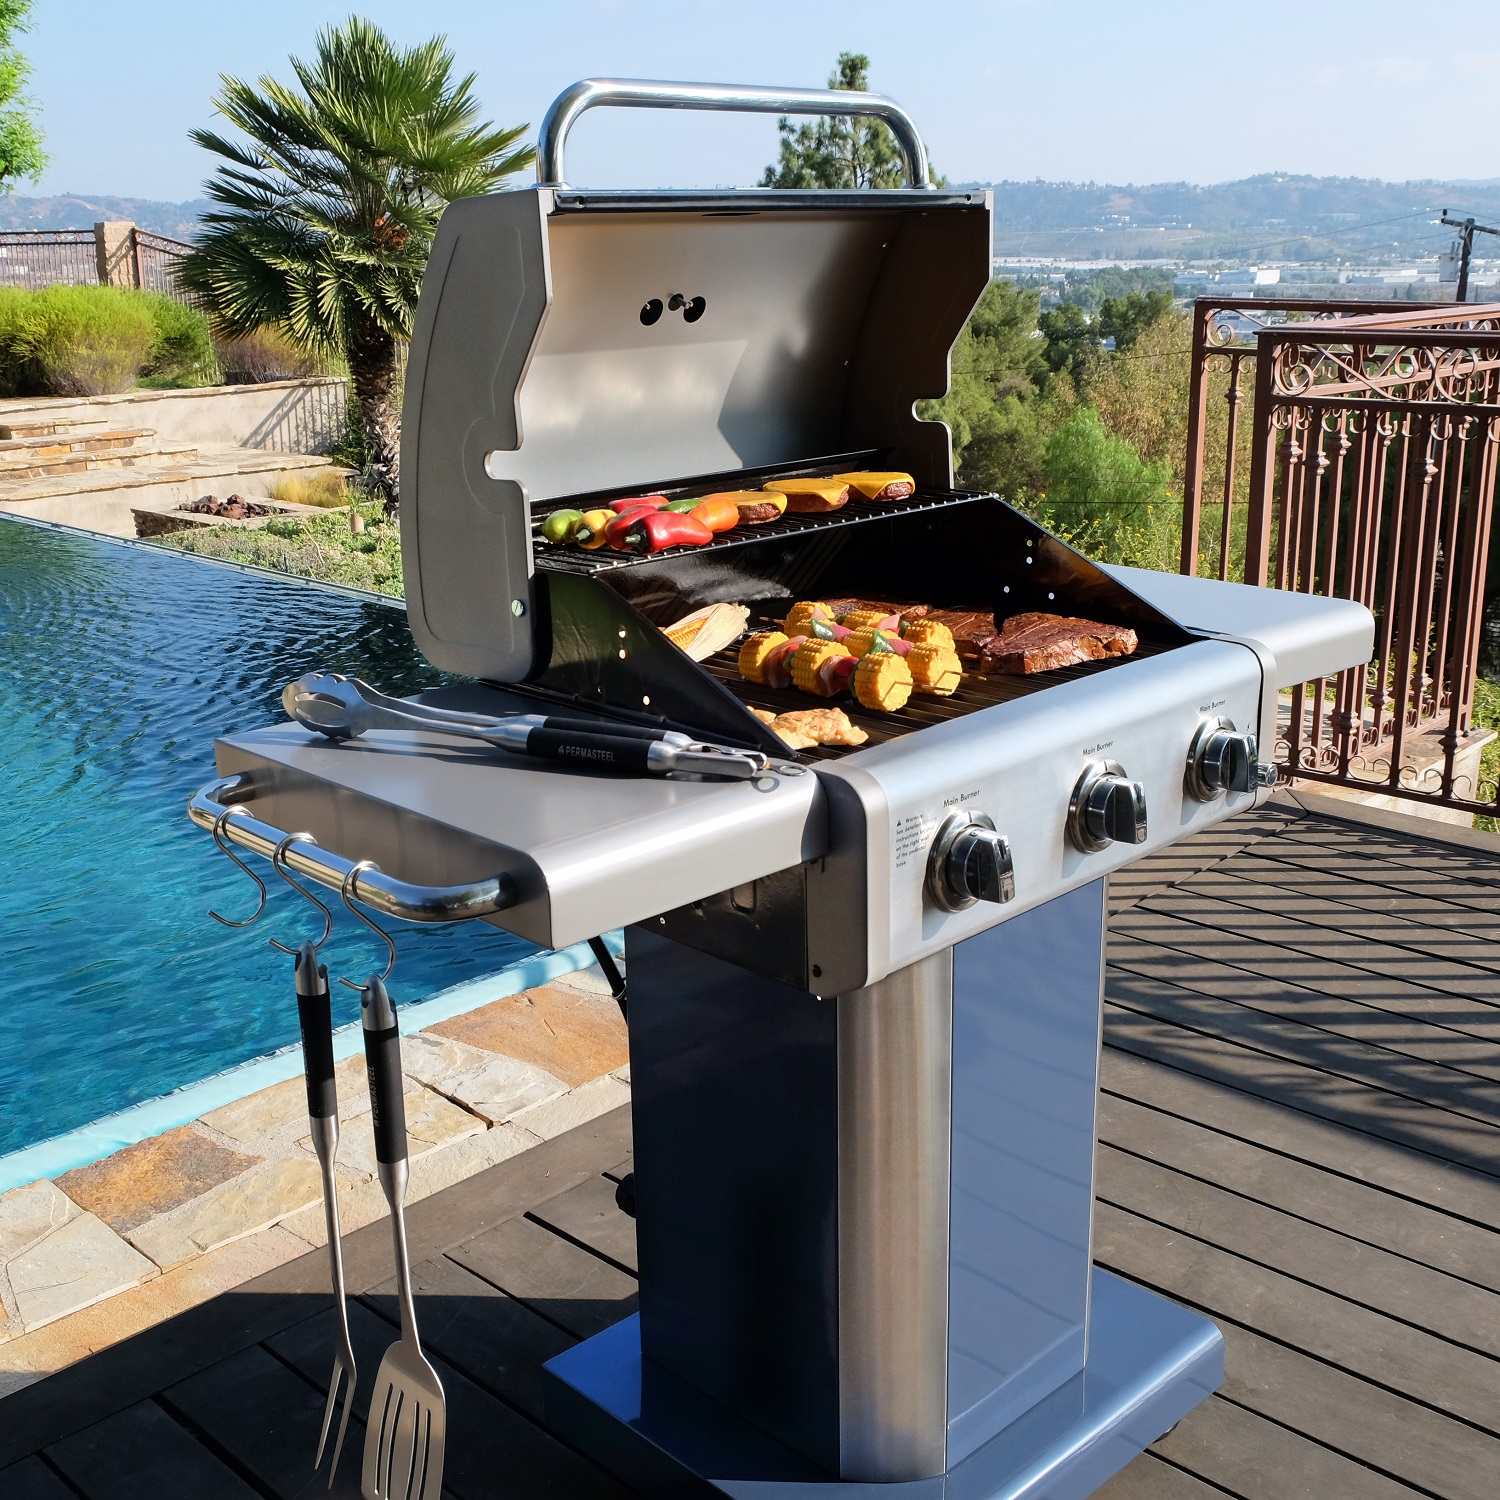 Kenmore 3-Burner Gas Grill, Outdoor BBQ Grill, Propane Grill with Foldable Side Tables, Azure Blue - image 4 of 12